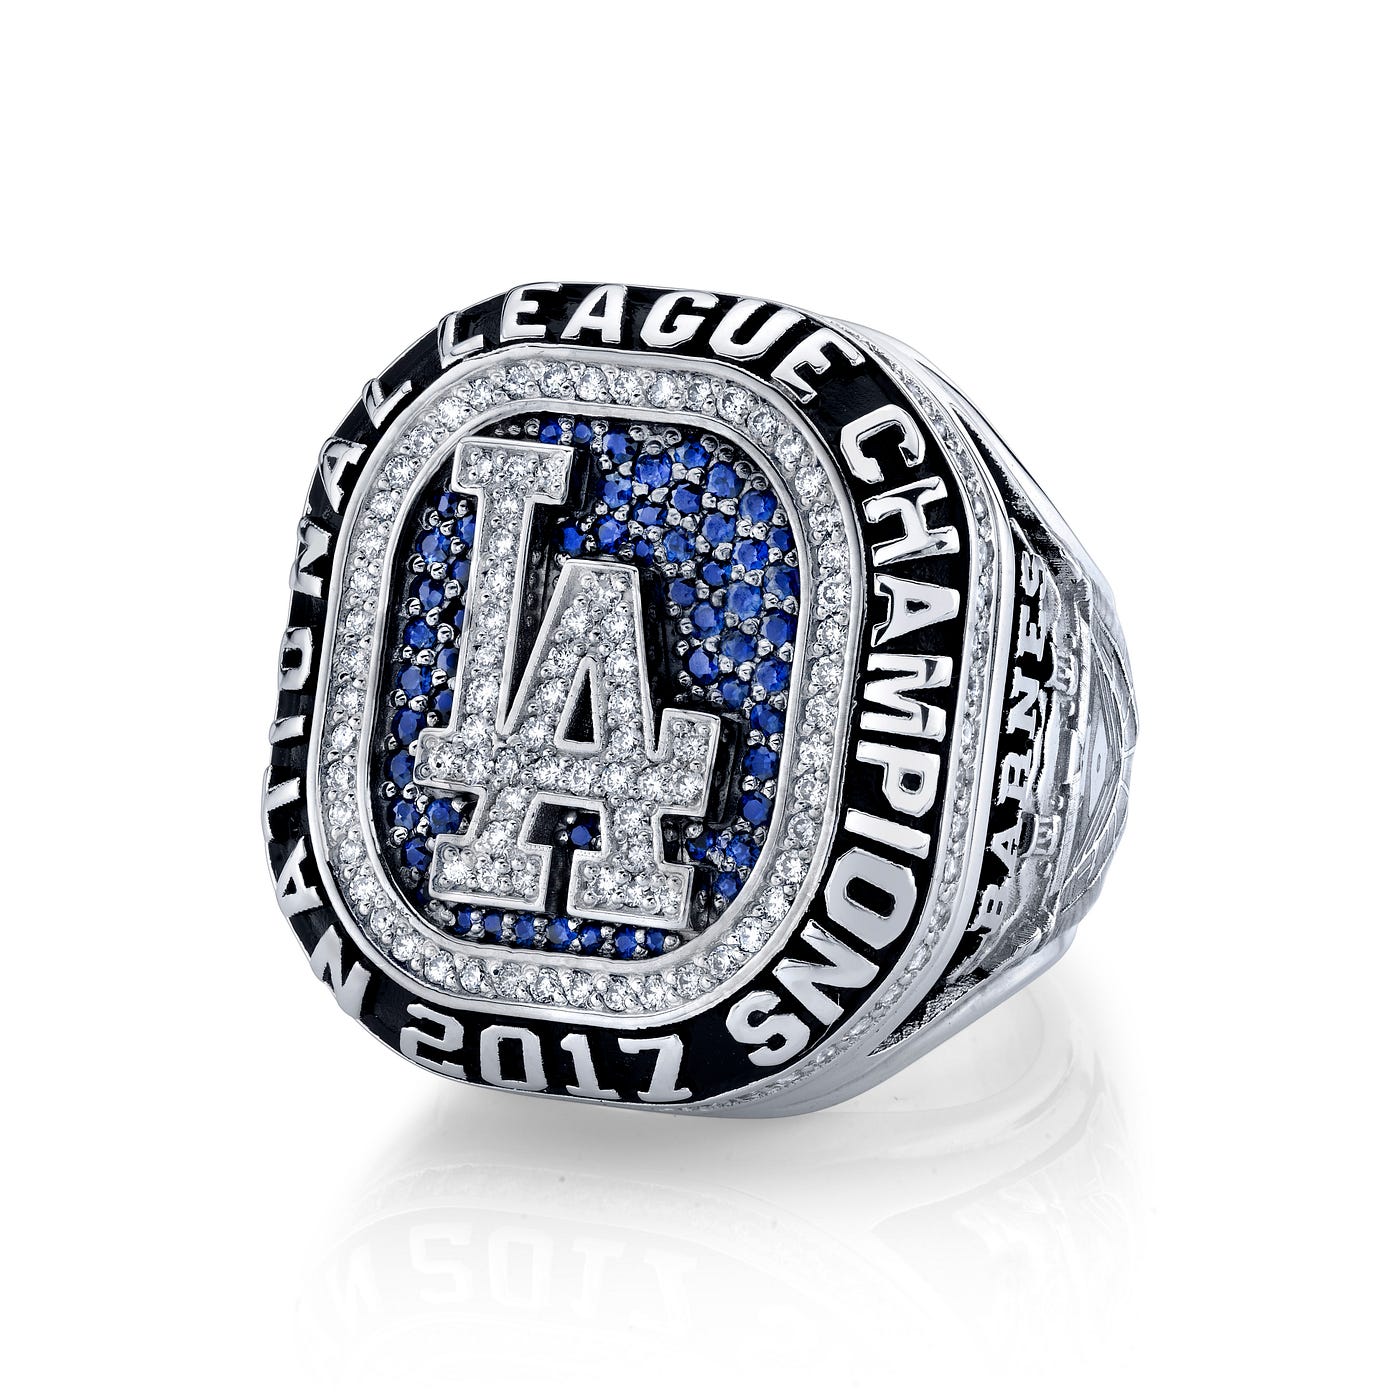 Dodgers presented with National League championship rings, by Cary Osborne